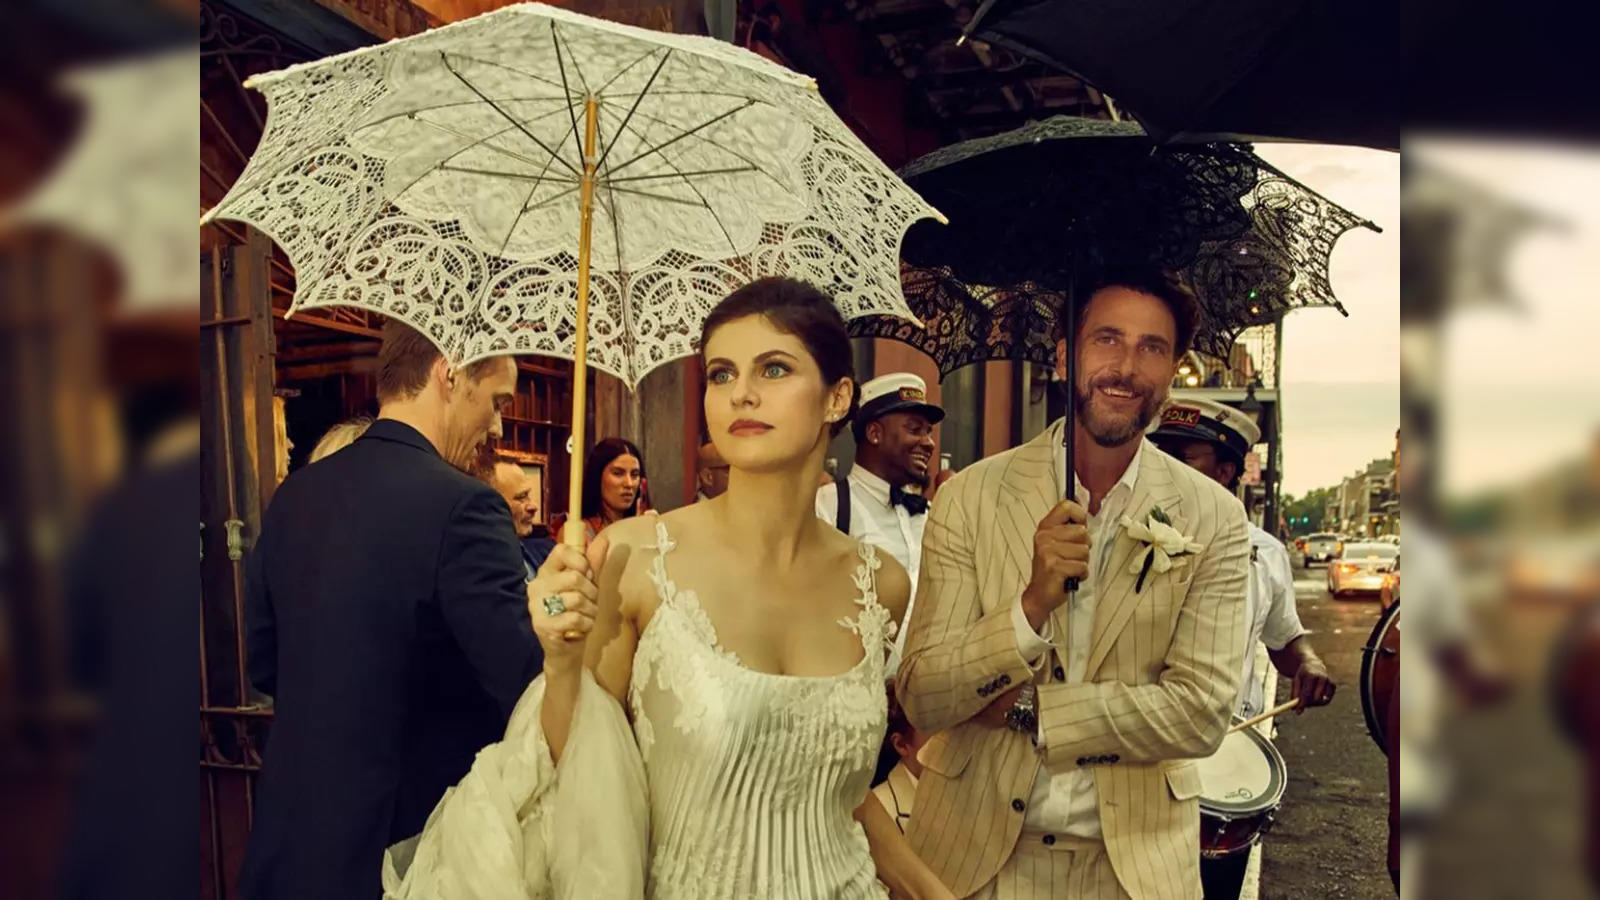 Alexandra Daddario Marries Andrew Form -- See the Stunning Wedding Pics